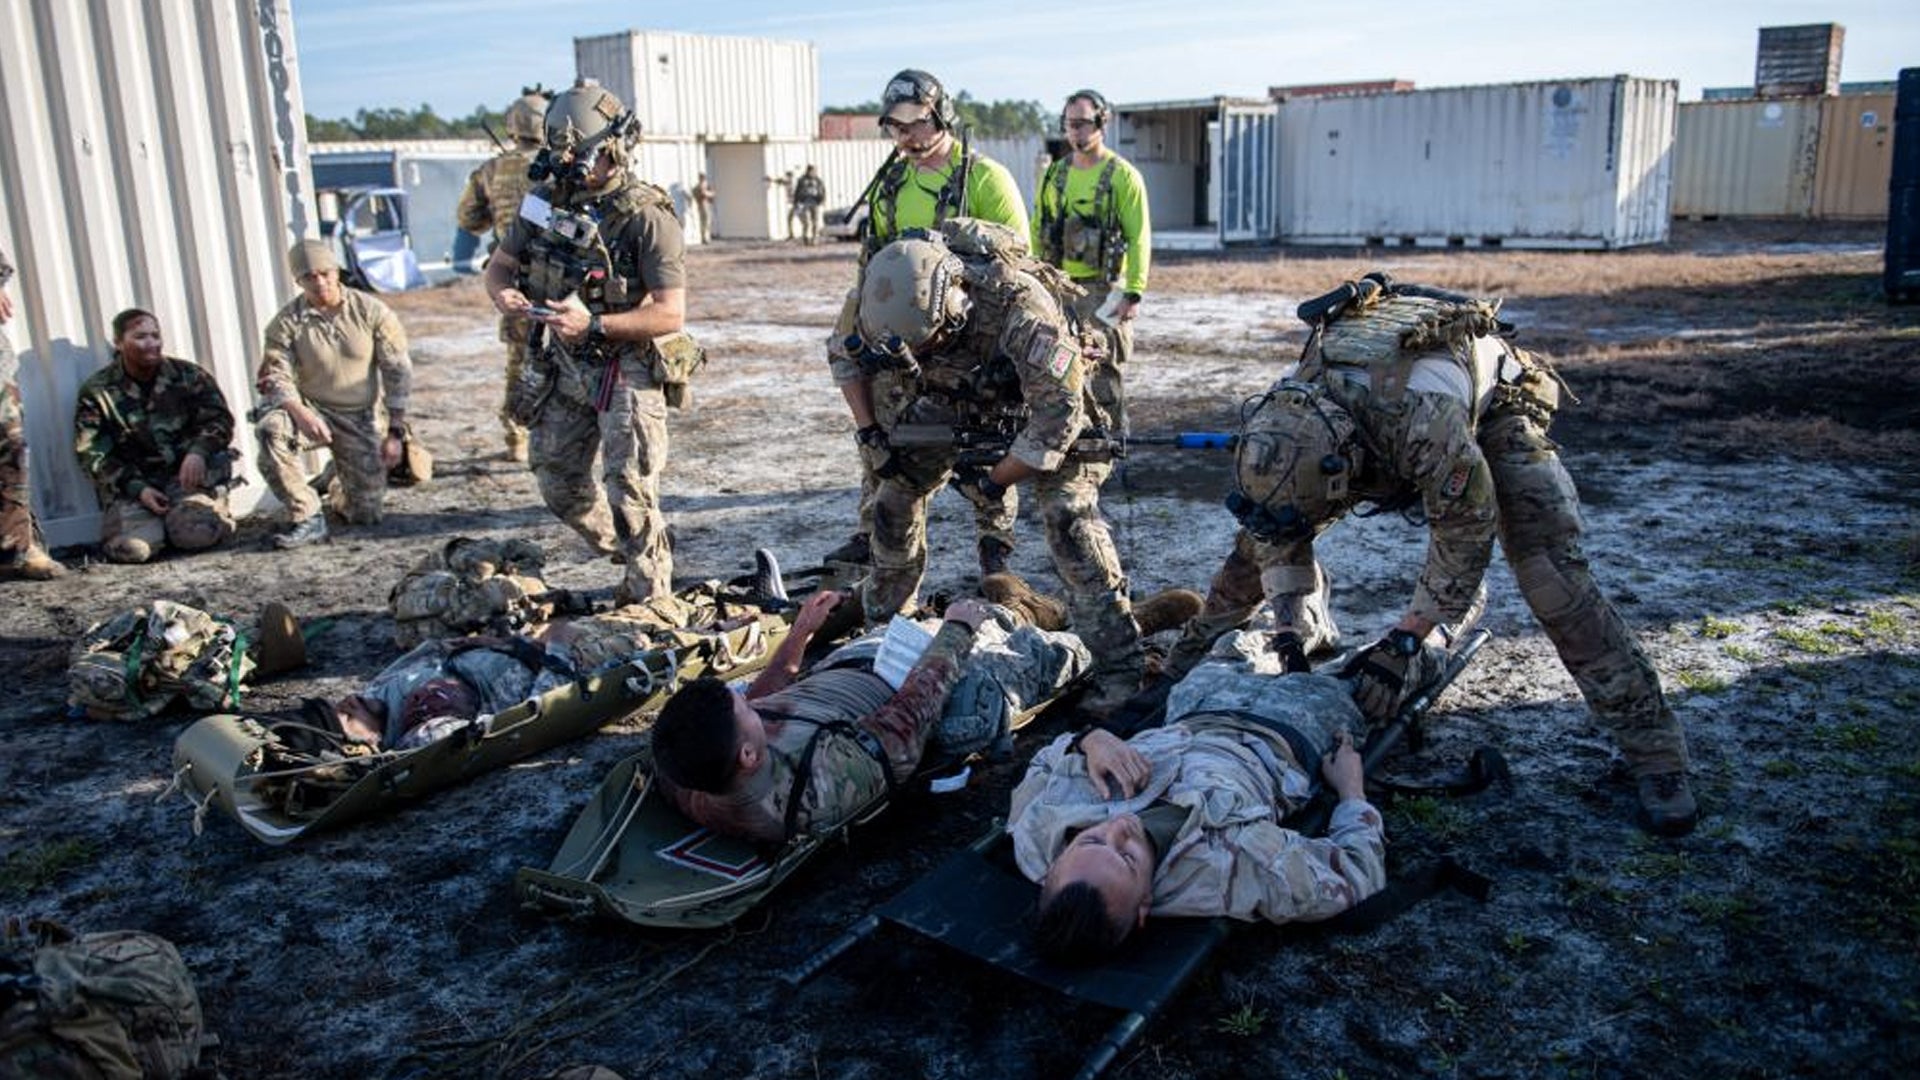 U.S. Air Force Pararescuemen from the 38th Rescue Squadron treat patients during a Mass Casualty Full Mission Profile exercise at Moody Air Force Base, Georgia, Jan. 19, 2023. (Airman 1st Class Courtney Sebastianelli/U.S. Air Force).